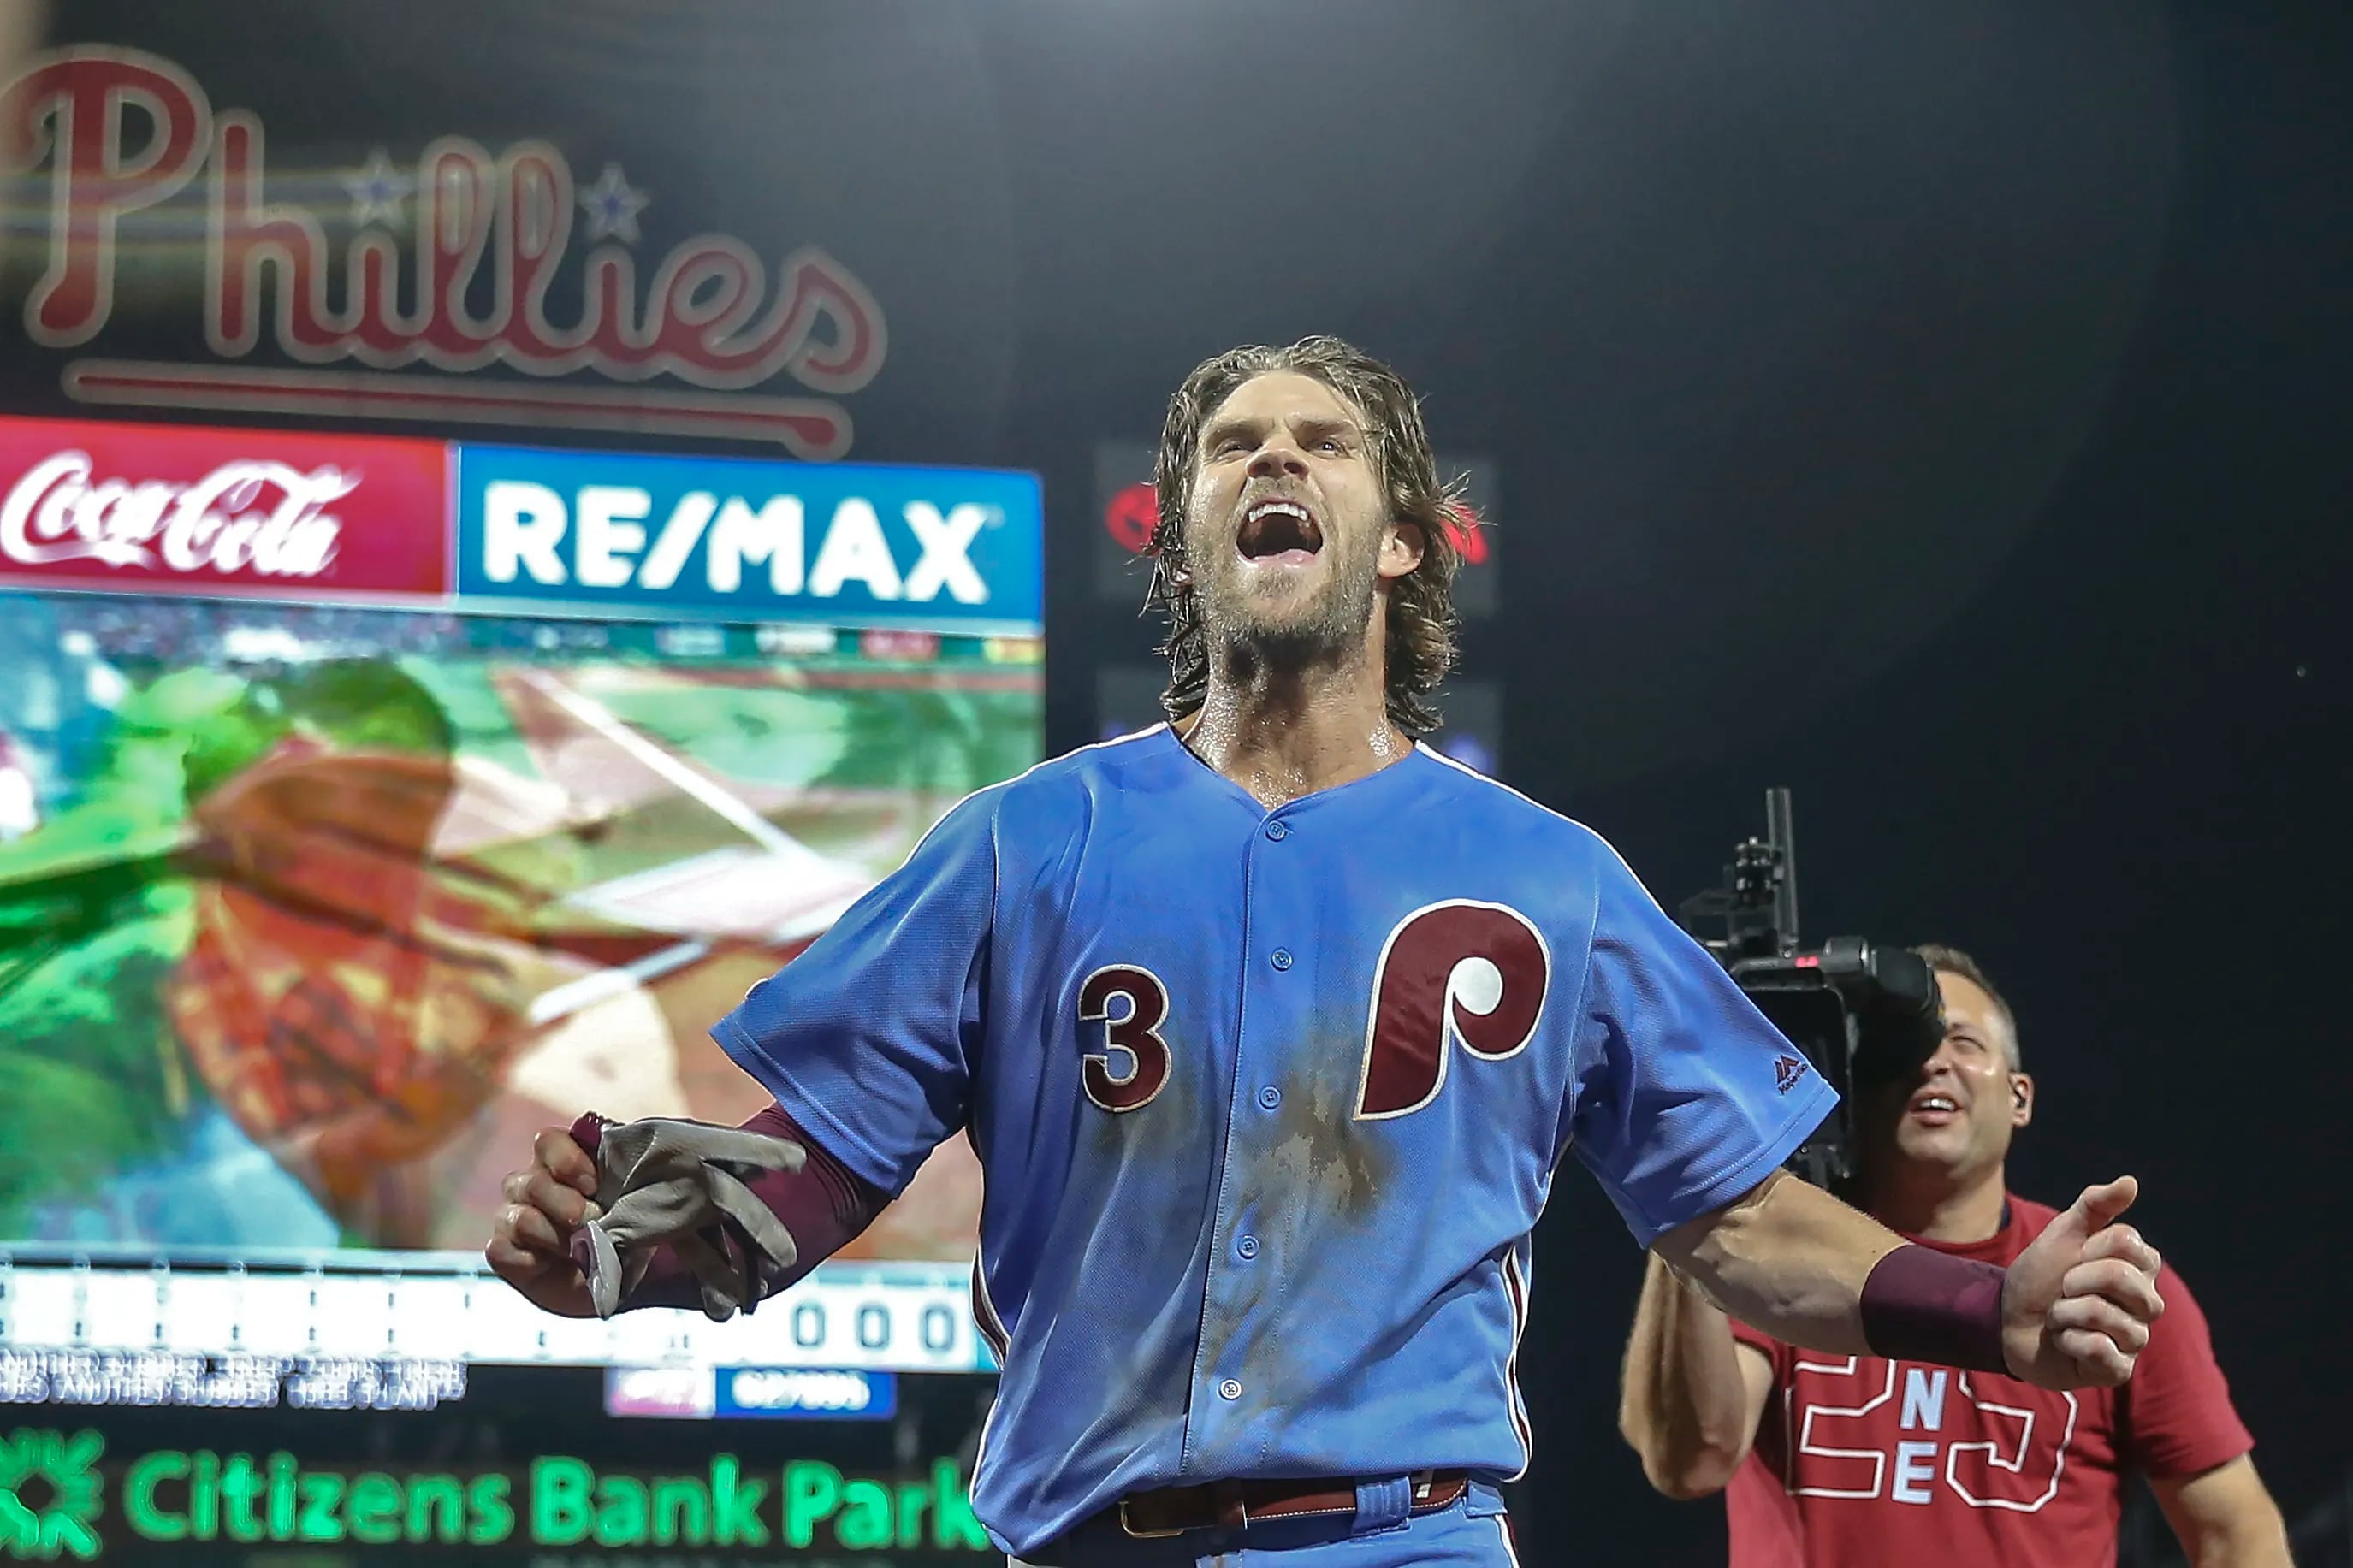 Through 4 years, who has been better — Bryce Harper or Manny Machado?   Phillies Nation - Your source for Philadelphia Phillies news, opinion,  history, rumors, events, and other fun stuff.